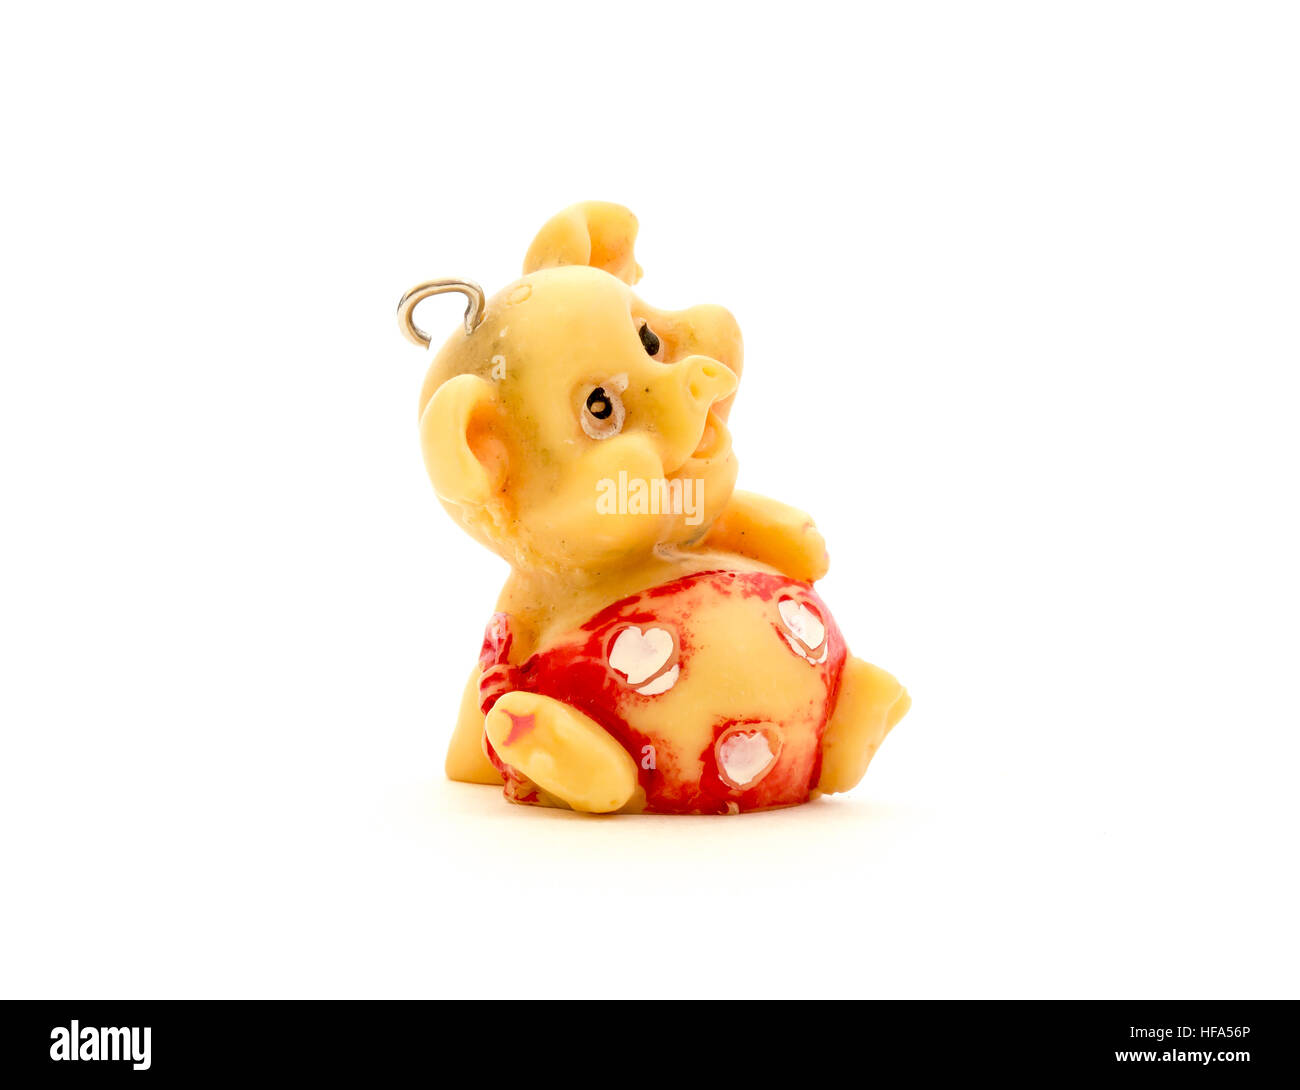 The Miniature isolated toy pig. Stock Photo